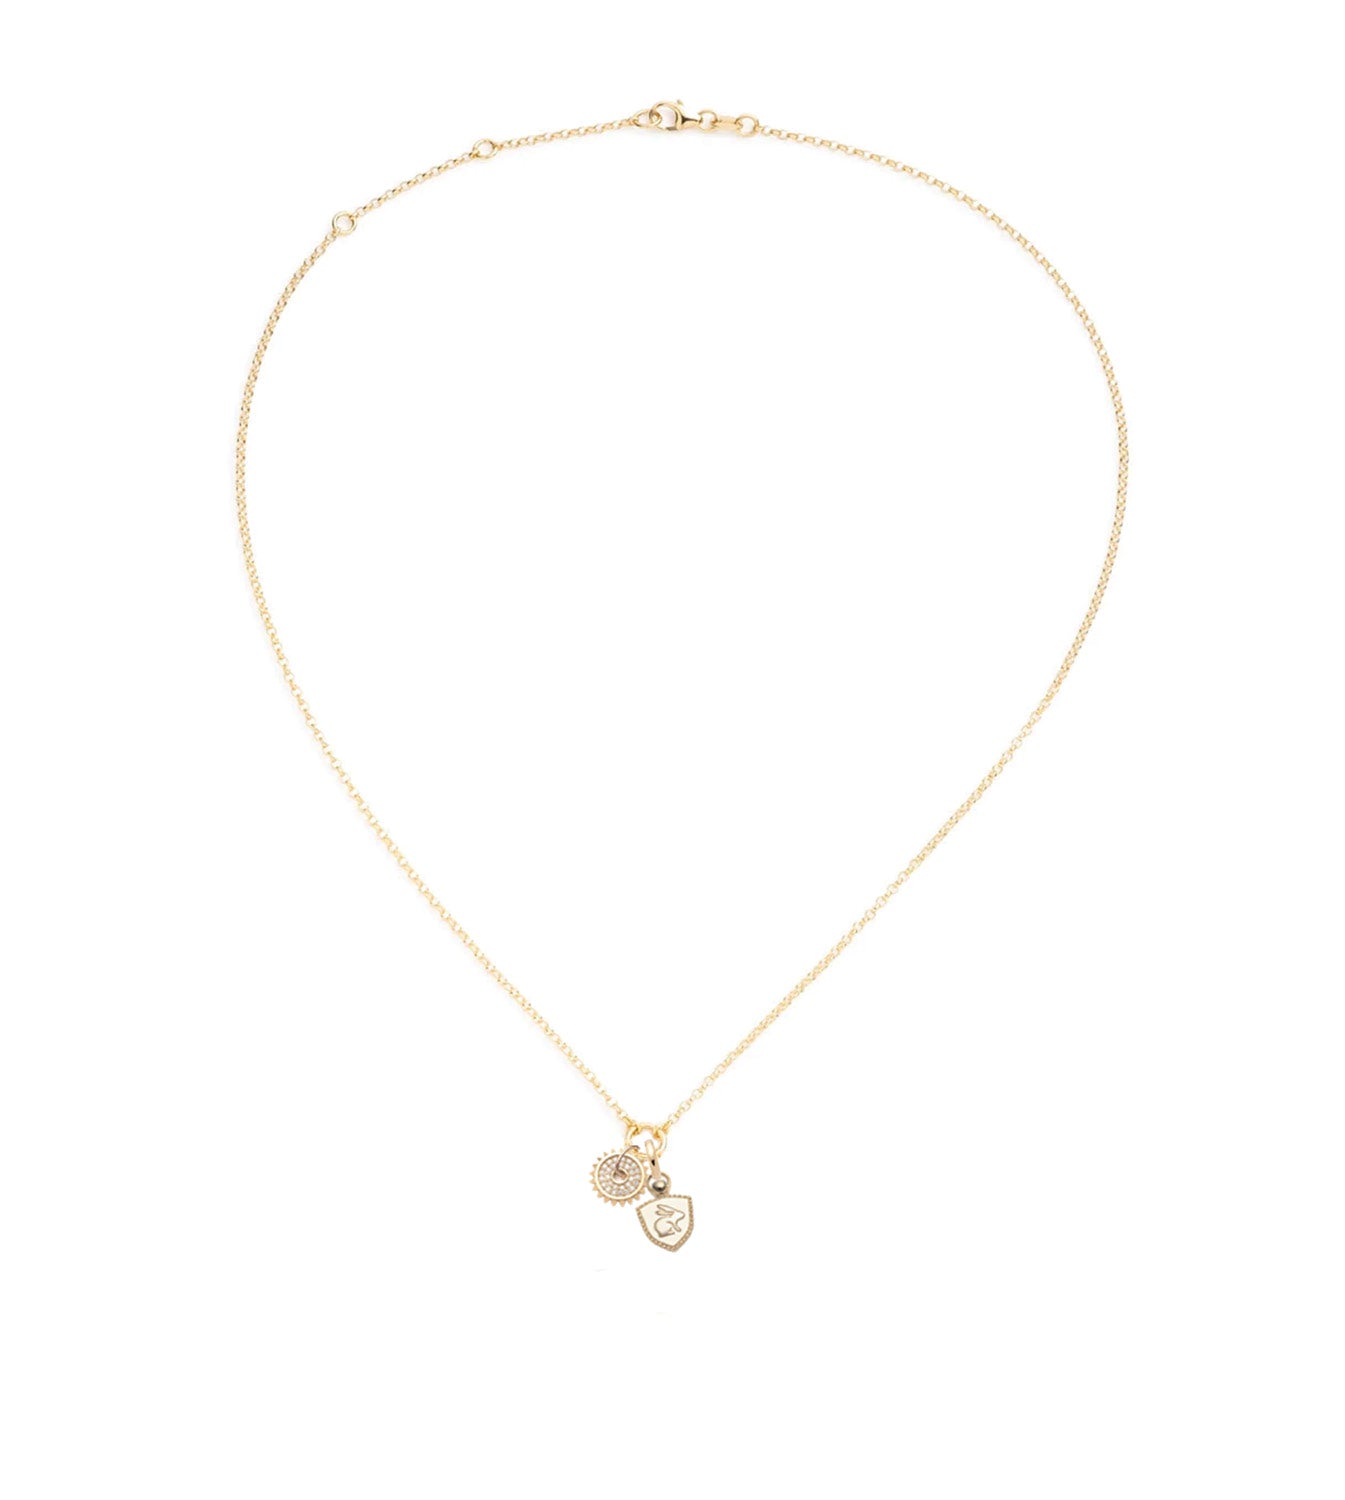 Bunny and Pave Disk - Love : Fine Belcher Stationary Chain Necklace